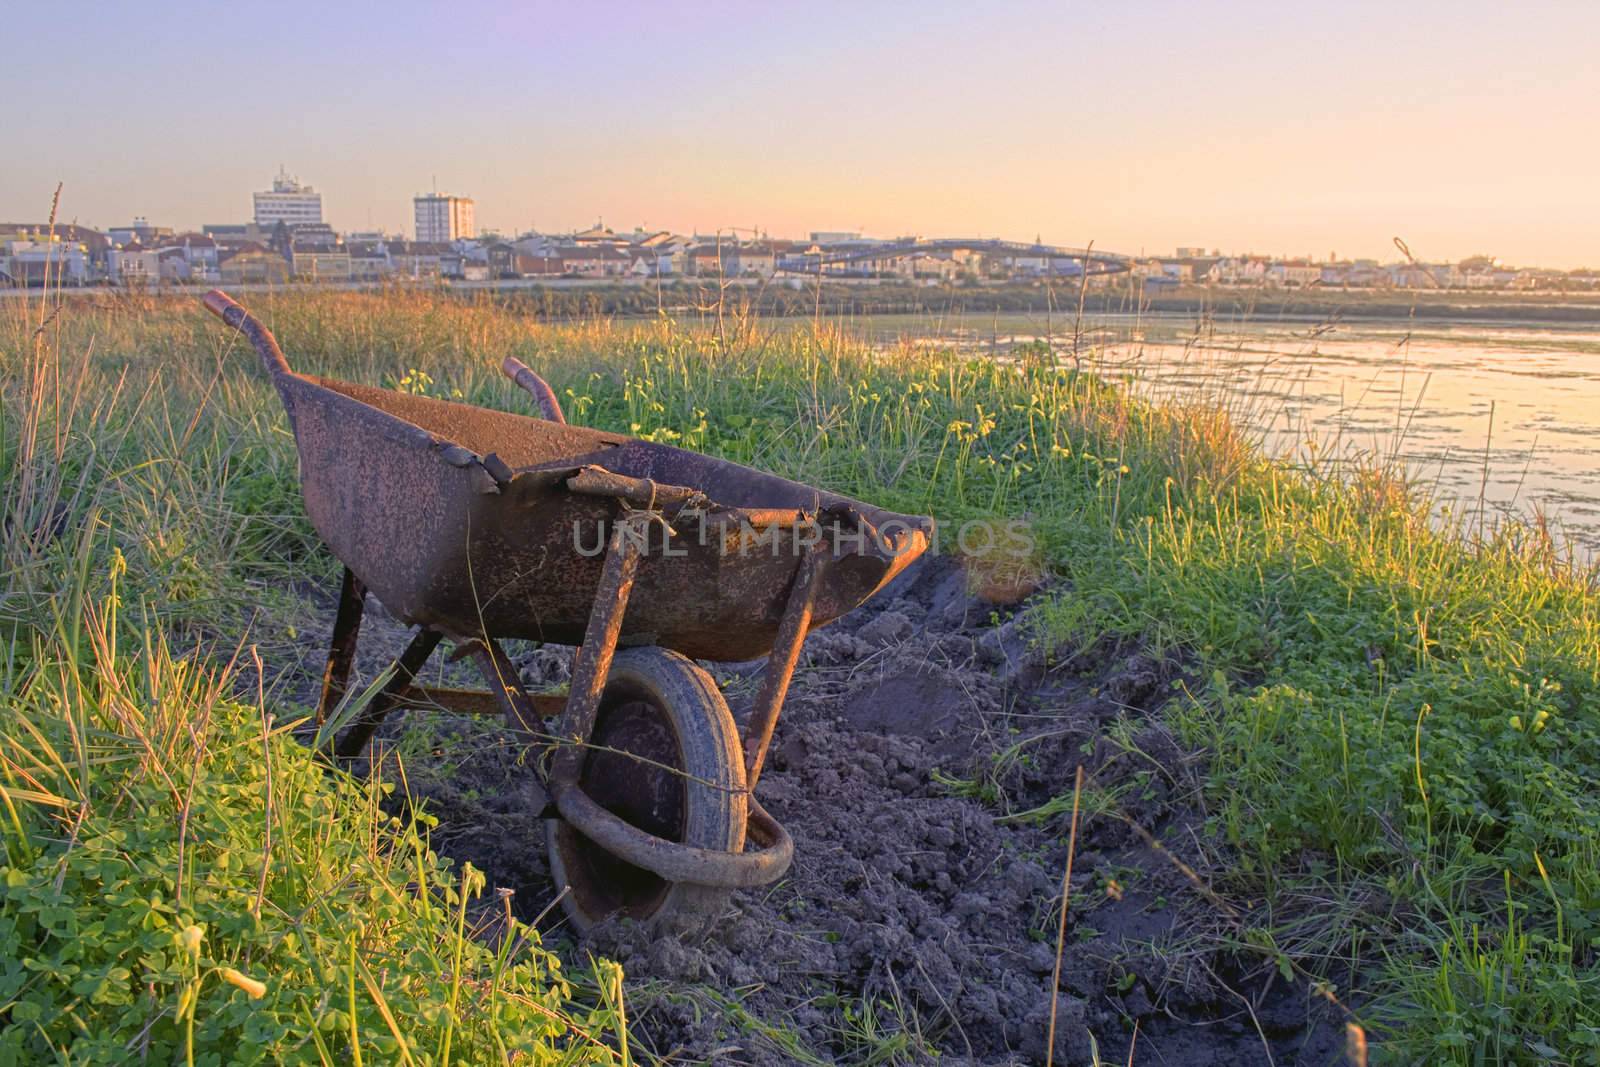 A rusty wheelbarrow abondon with the city in the background